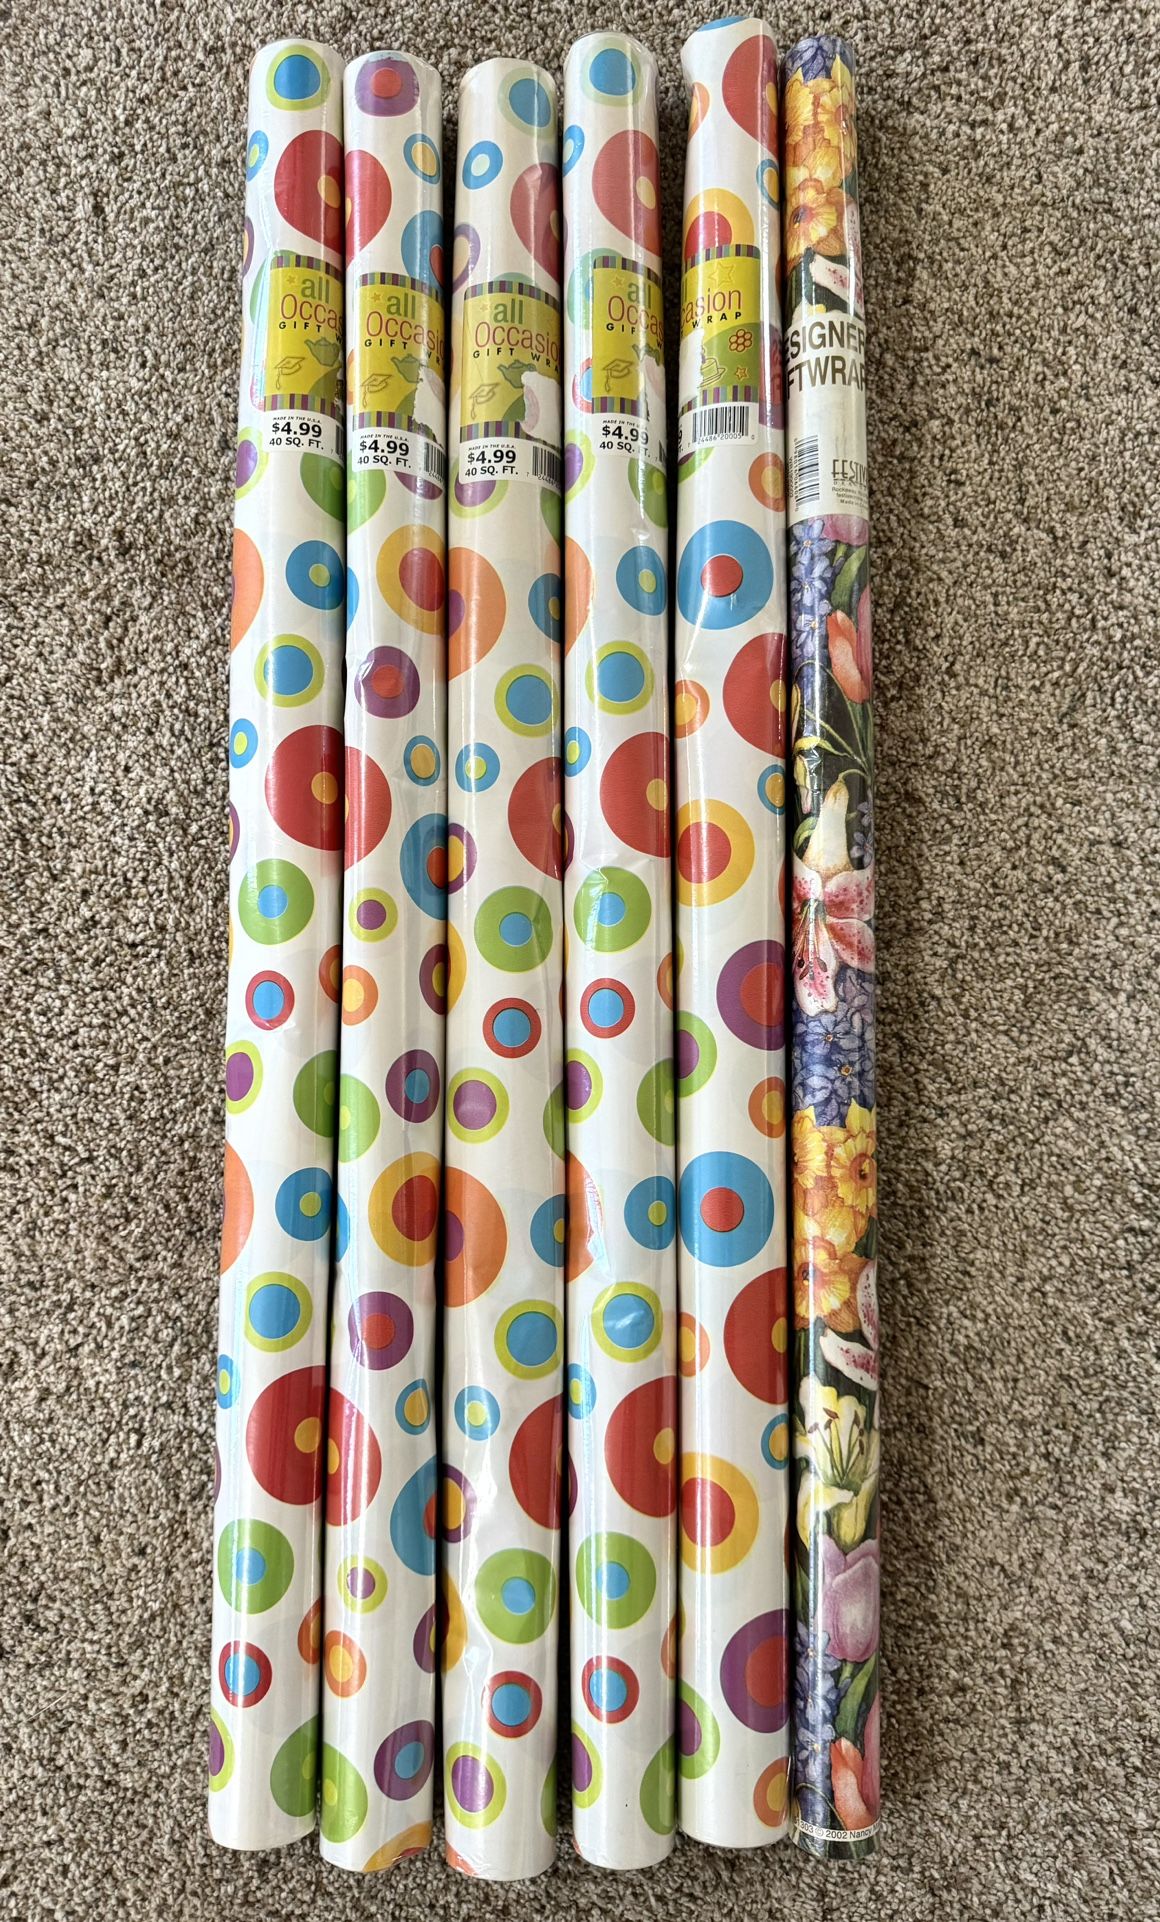 6 NEW rolls of Wrapping Paper. 5 are same with an “All Occasion” design & also 1 with floral look.